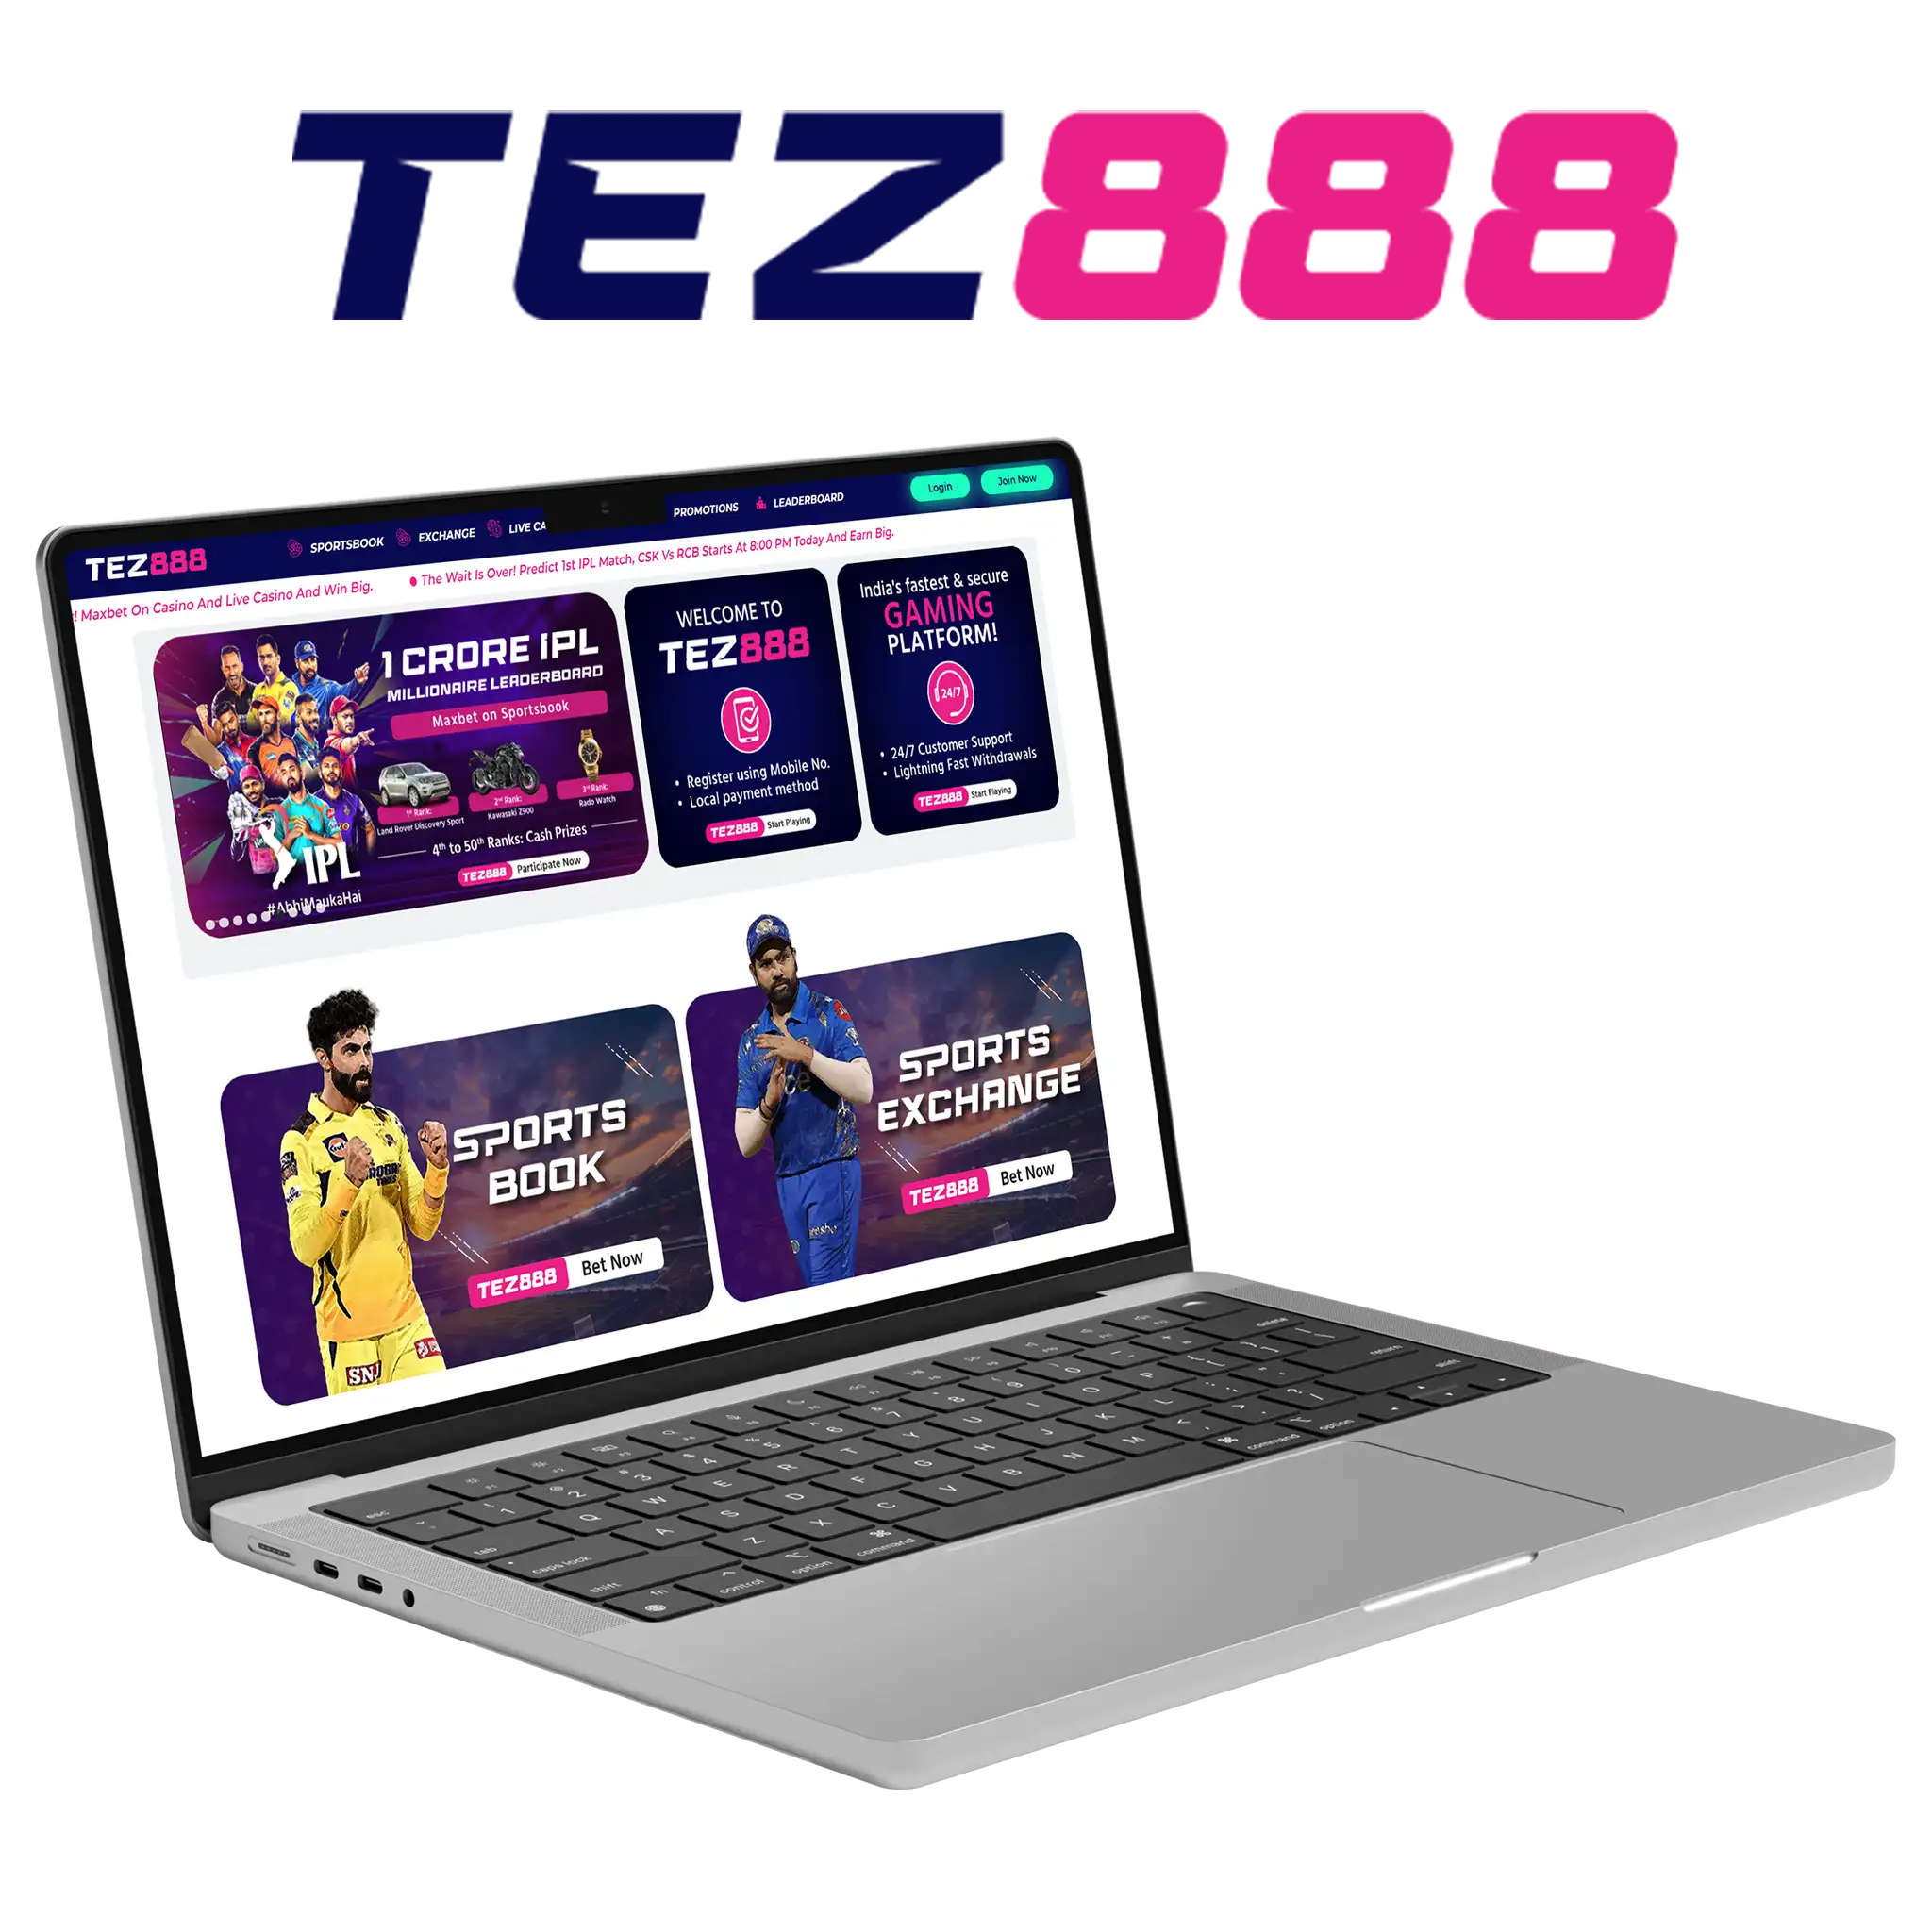 No matter what you expect from your bets - just know, Tez888 can fulfill that.